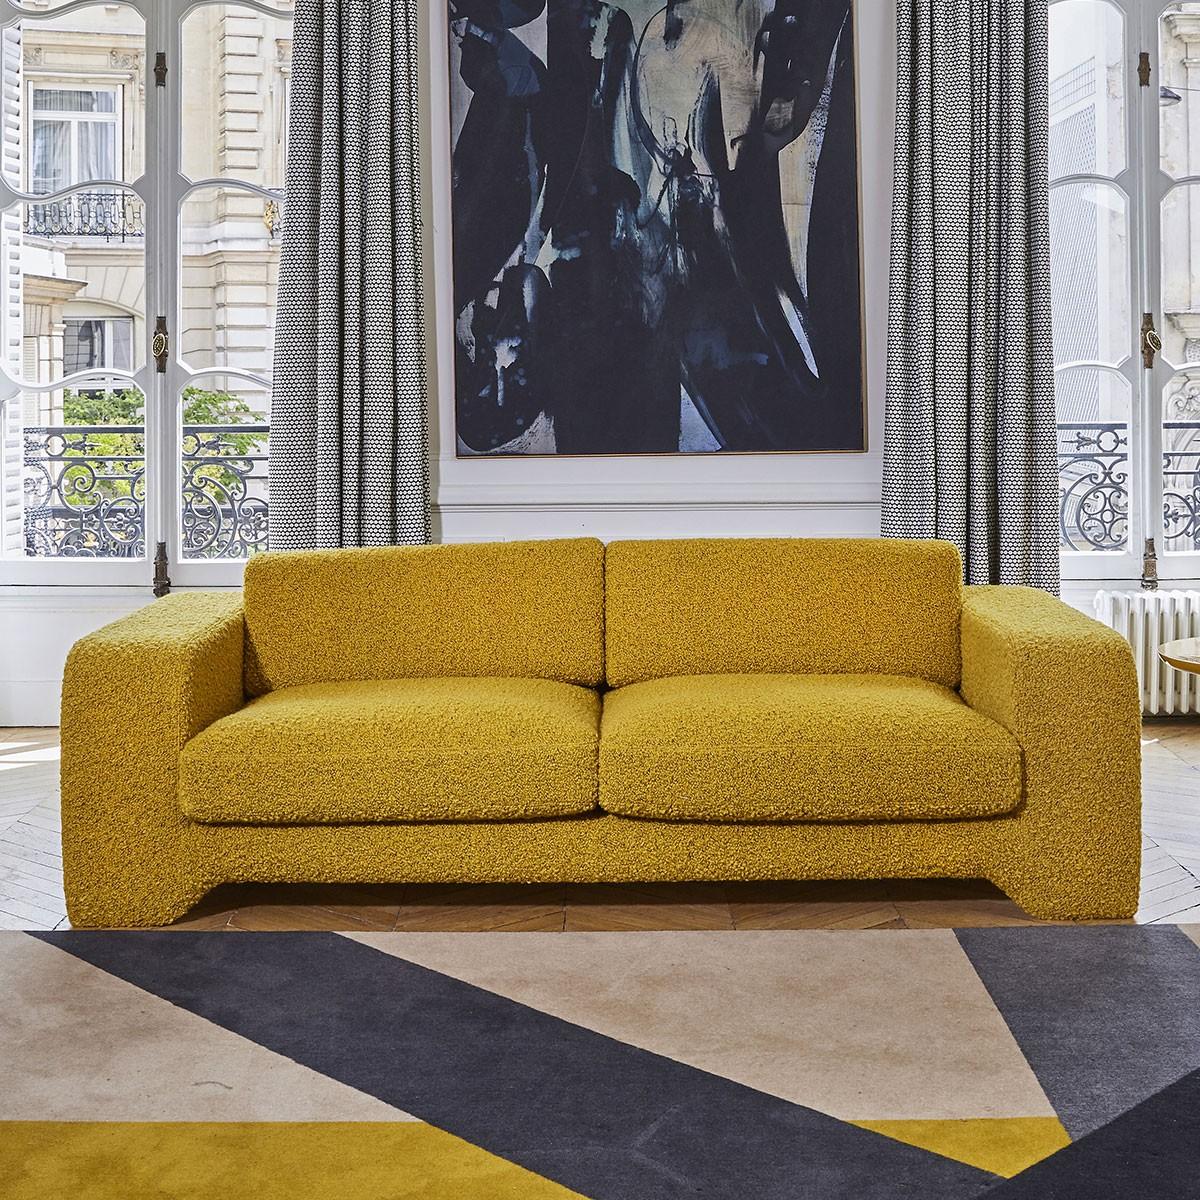 Popus Editions Giovanna 2.5 seater sofa in blue verone velvet upholstery

Giovanna is a sofa with a strong profile. A sober, plush line, with this famous detail that changes everything, so as not to forget its strength of character and this